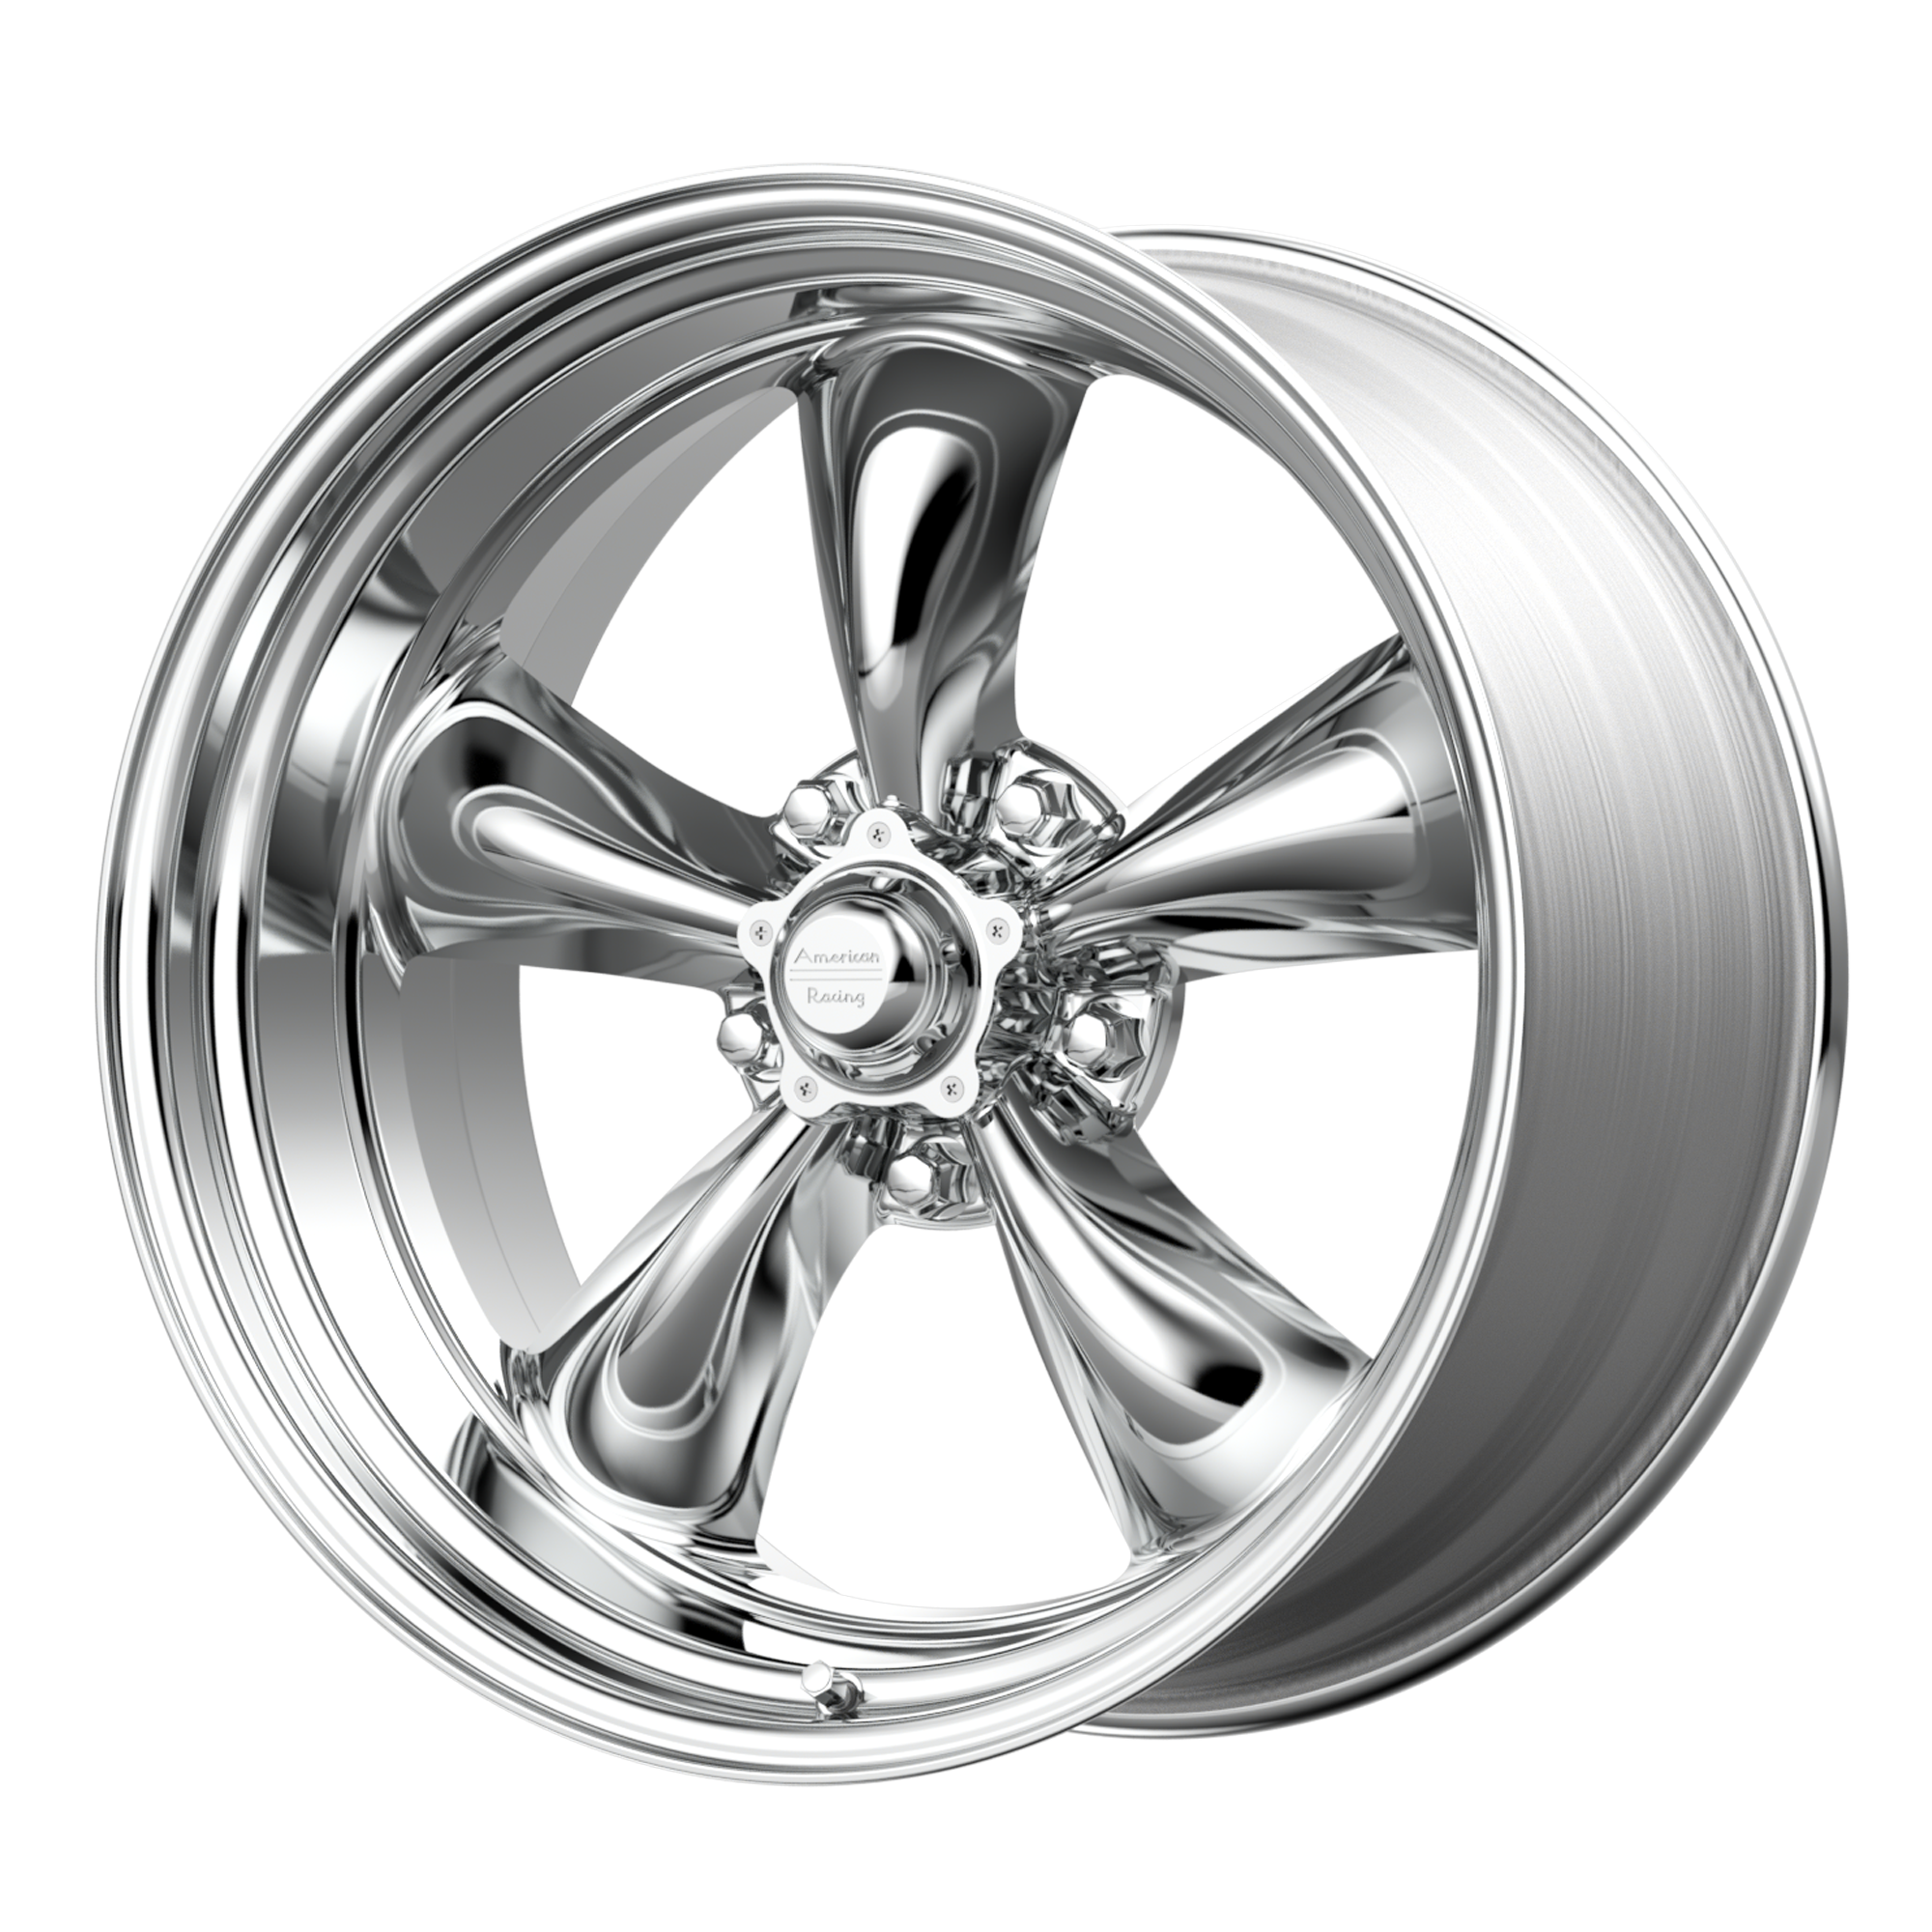 TORQ THRUST II 1 PC 15x8 5x120.65 POLISHED (-18 mm) - Tires and Engine Performance